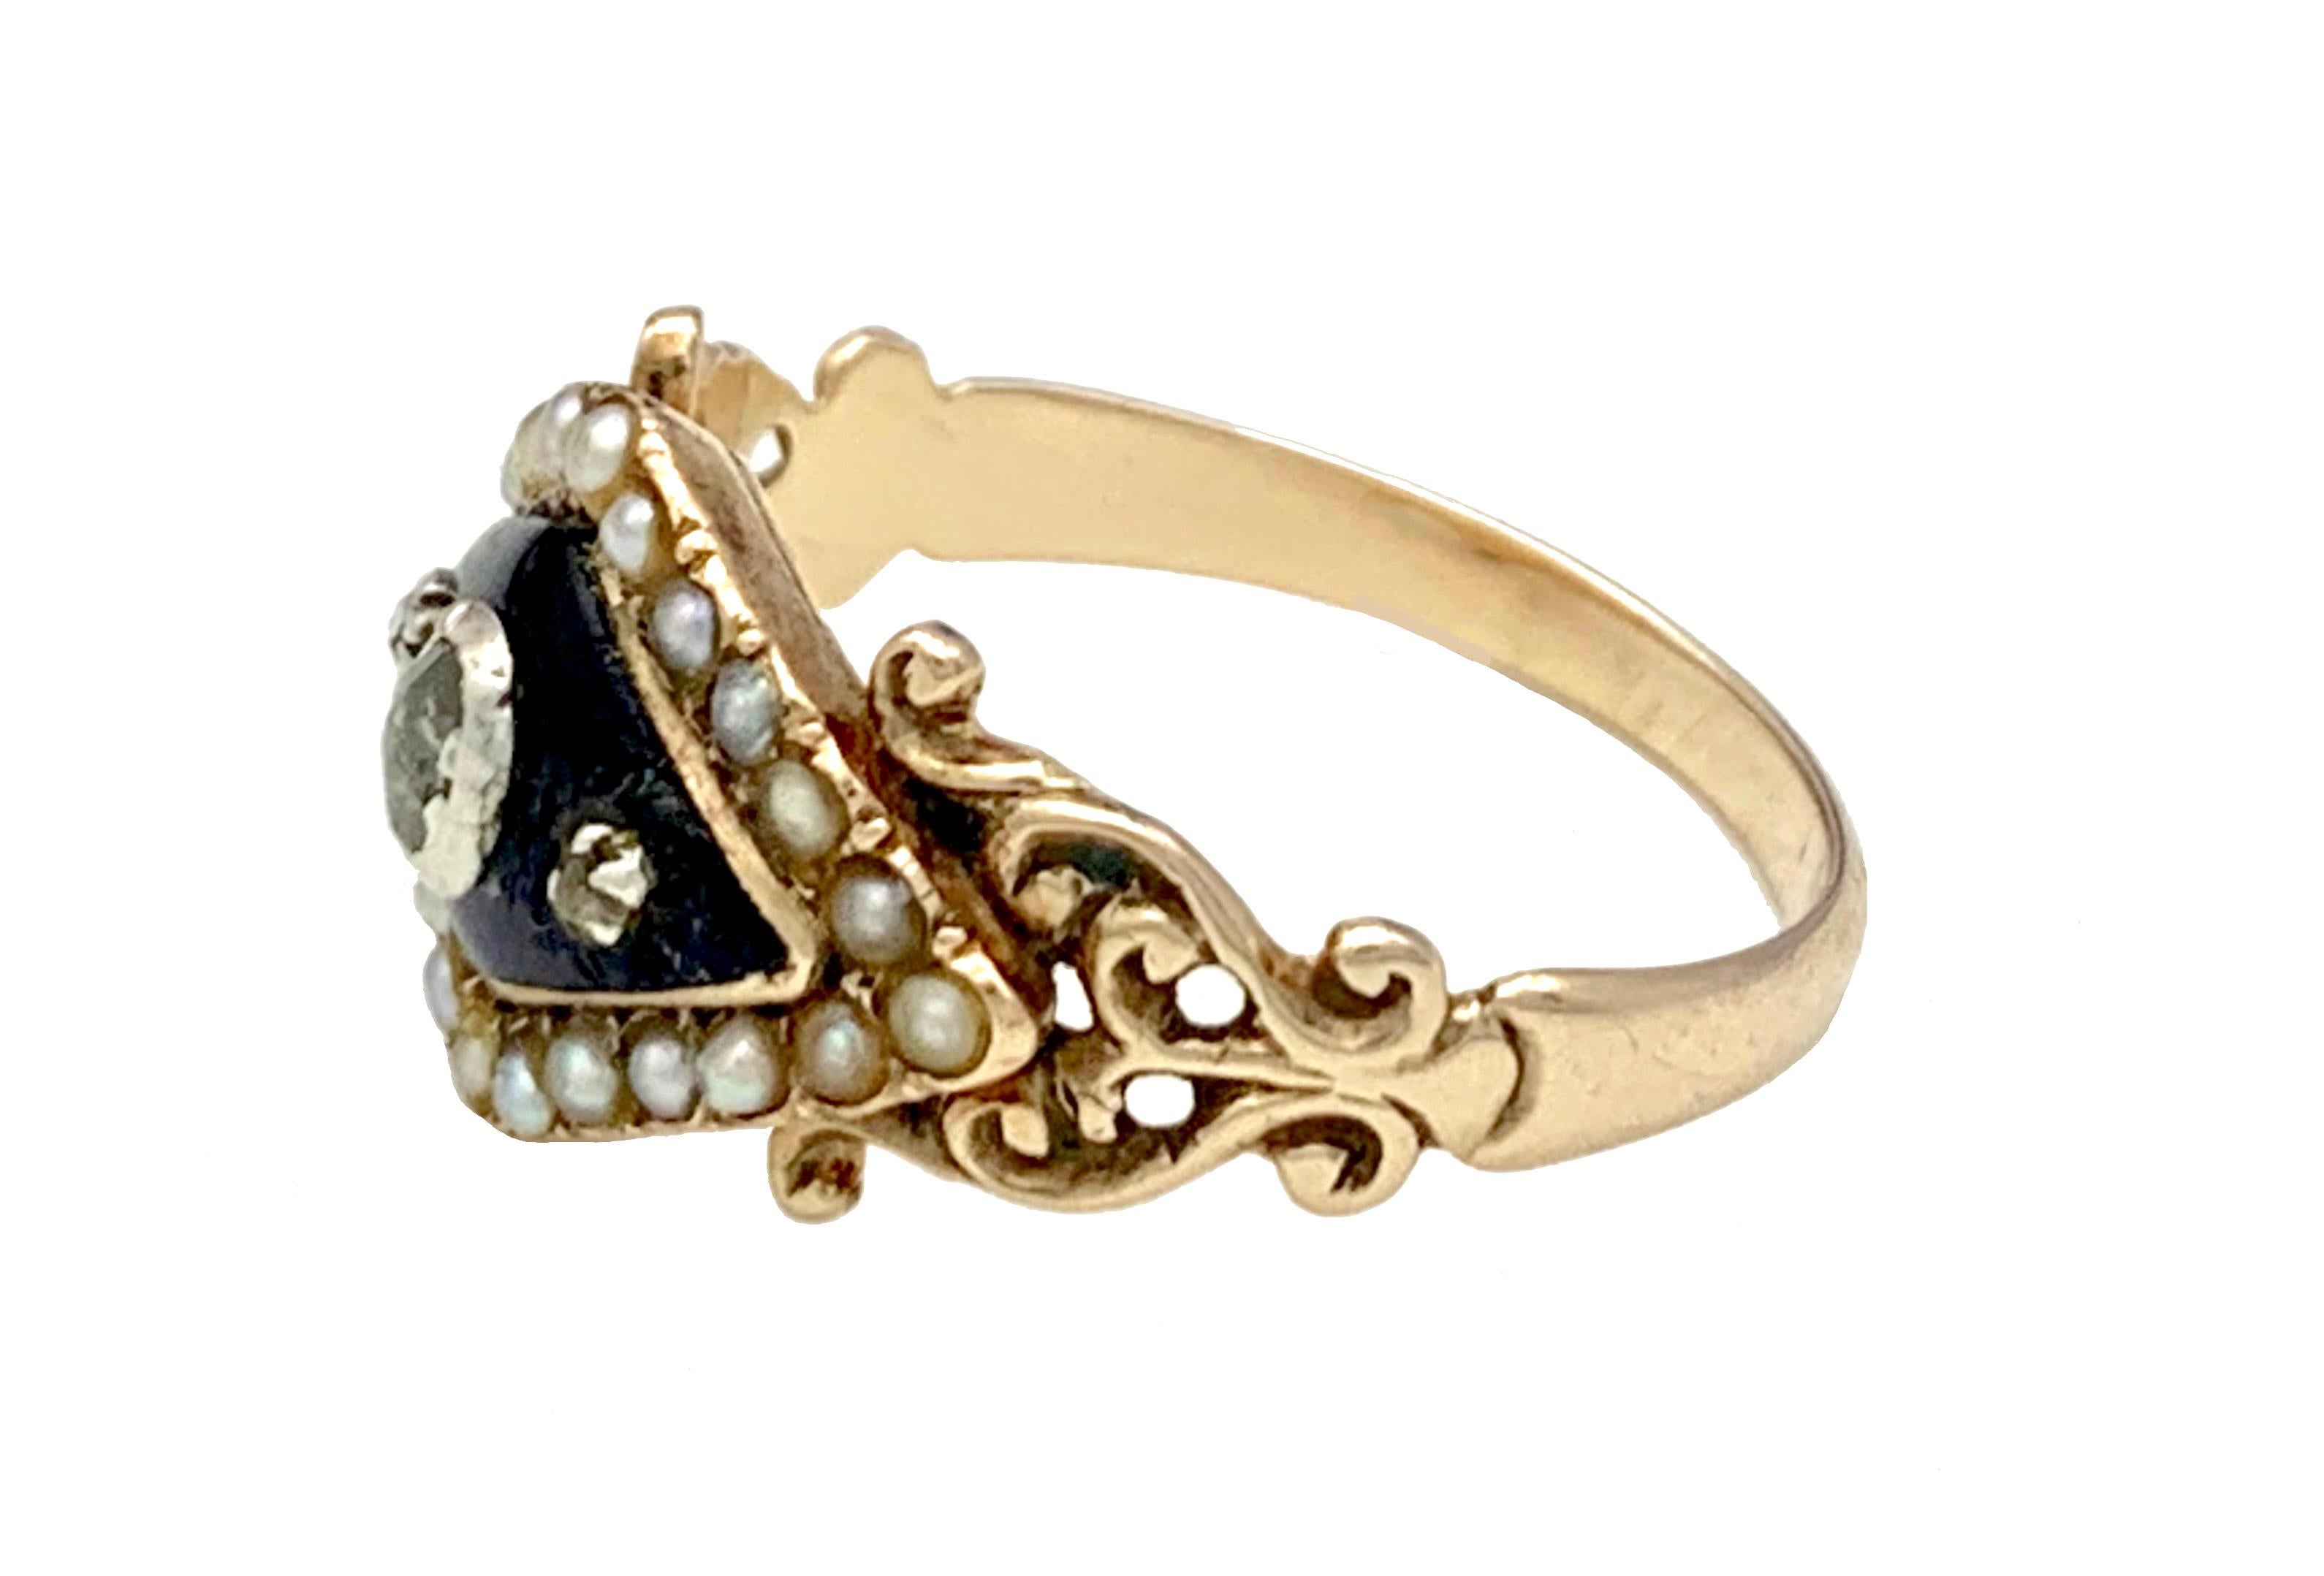 This fine and delicate Empire ring is designed as a night blue enamelled lozenge set with 3 silver set diamonds within a natural oriental pearl surround. The lozenge is held by openwork ring shoulders leading to a simple band. The ring is engraved